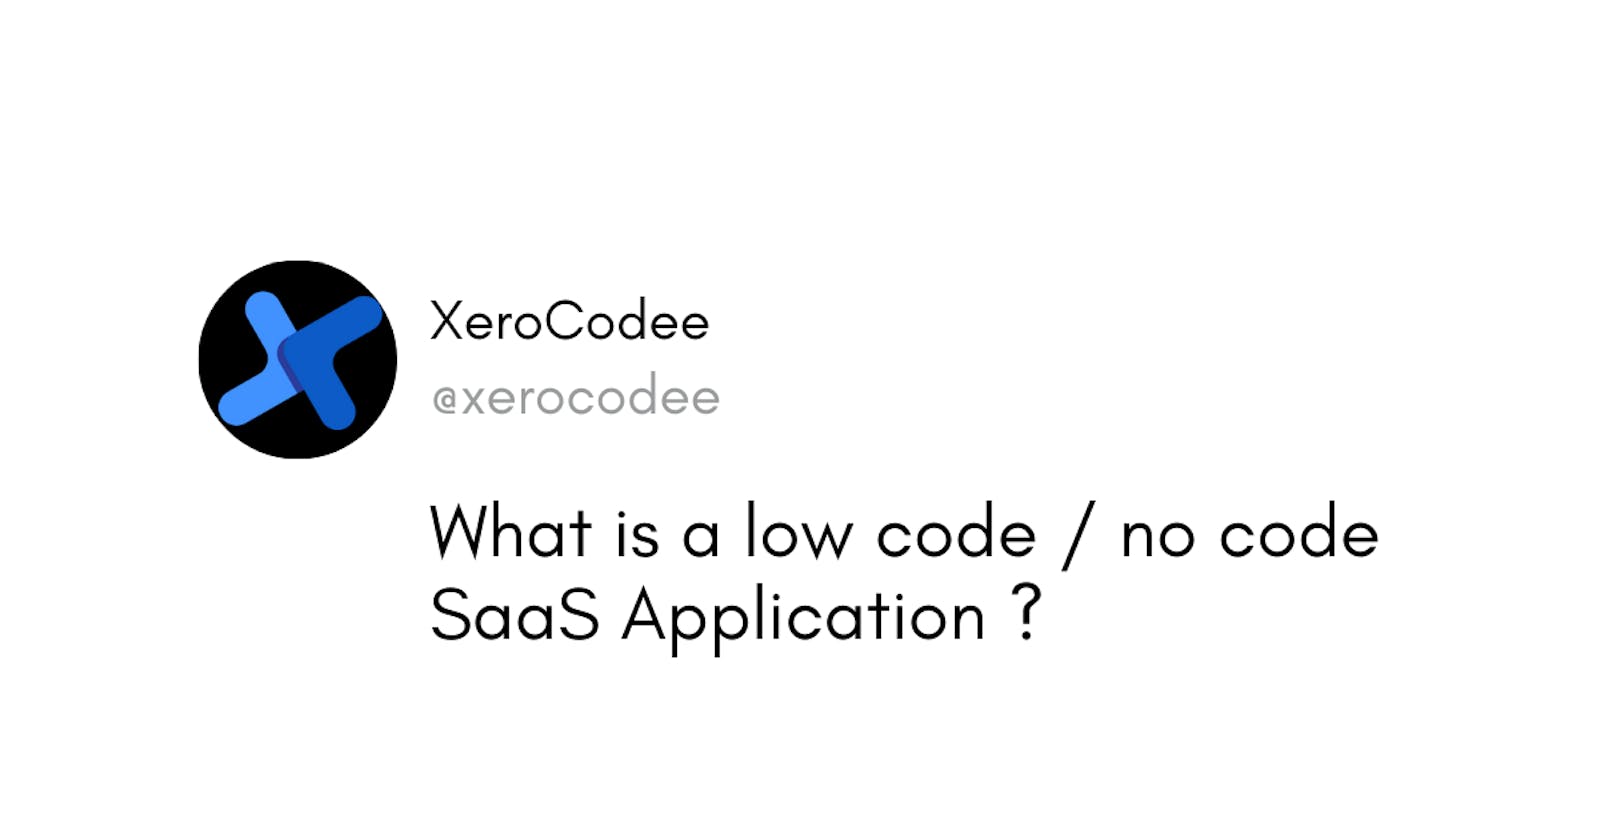 What is a low code/no code SaaS Application?